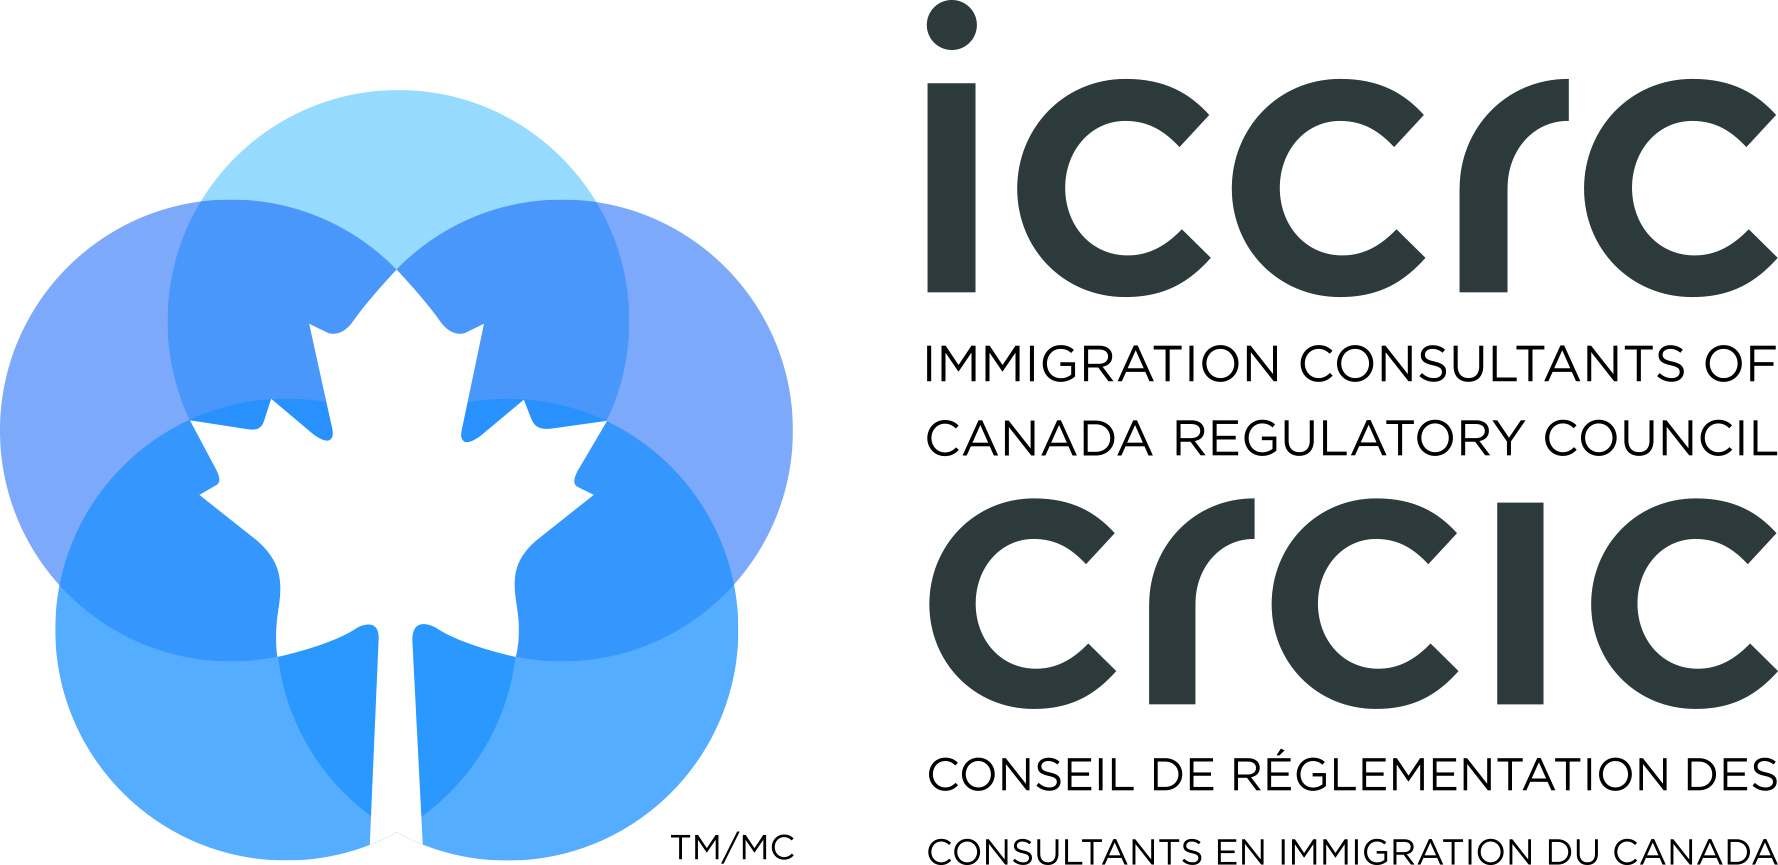 ICCRC Initials, full name, flower (side stacked) colour.jpg